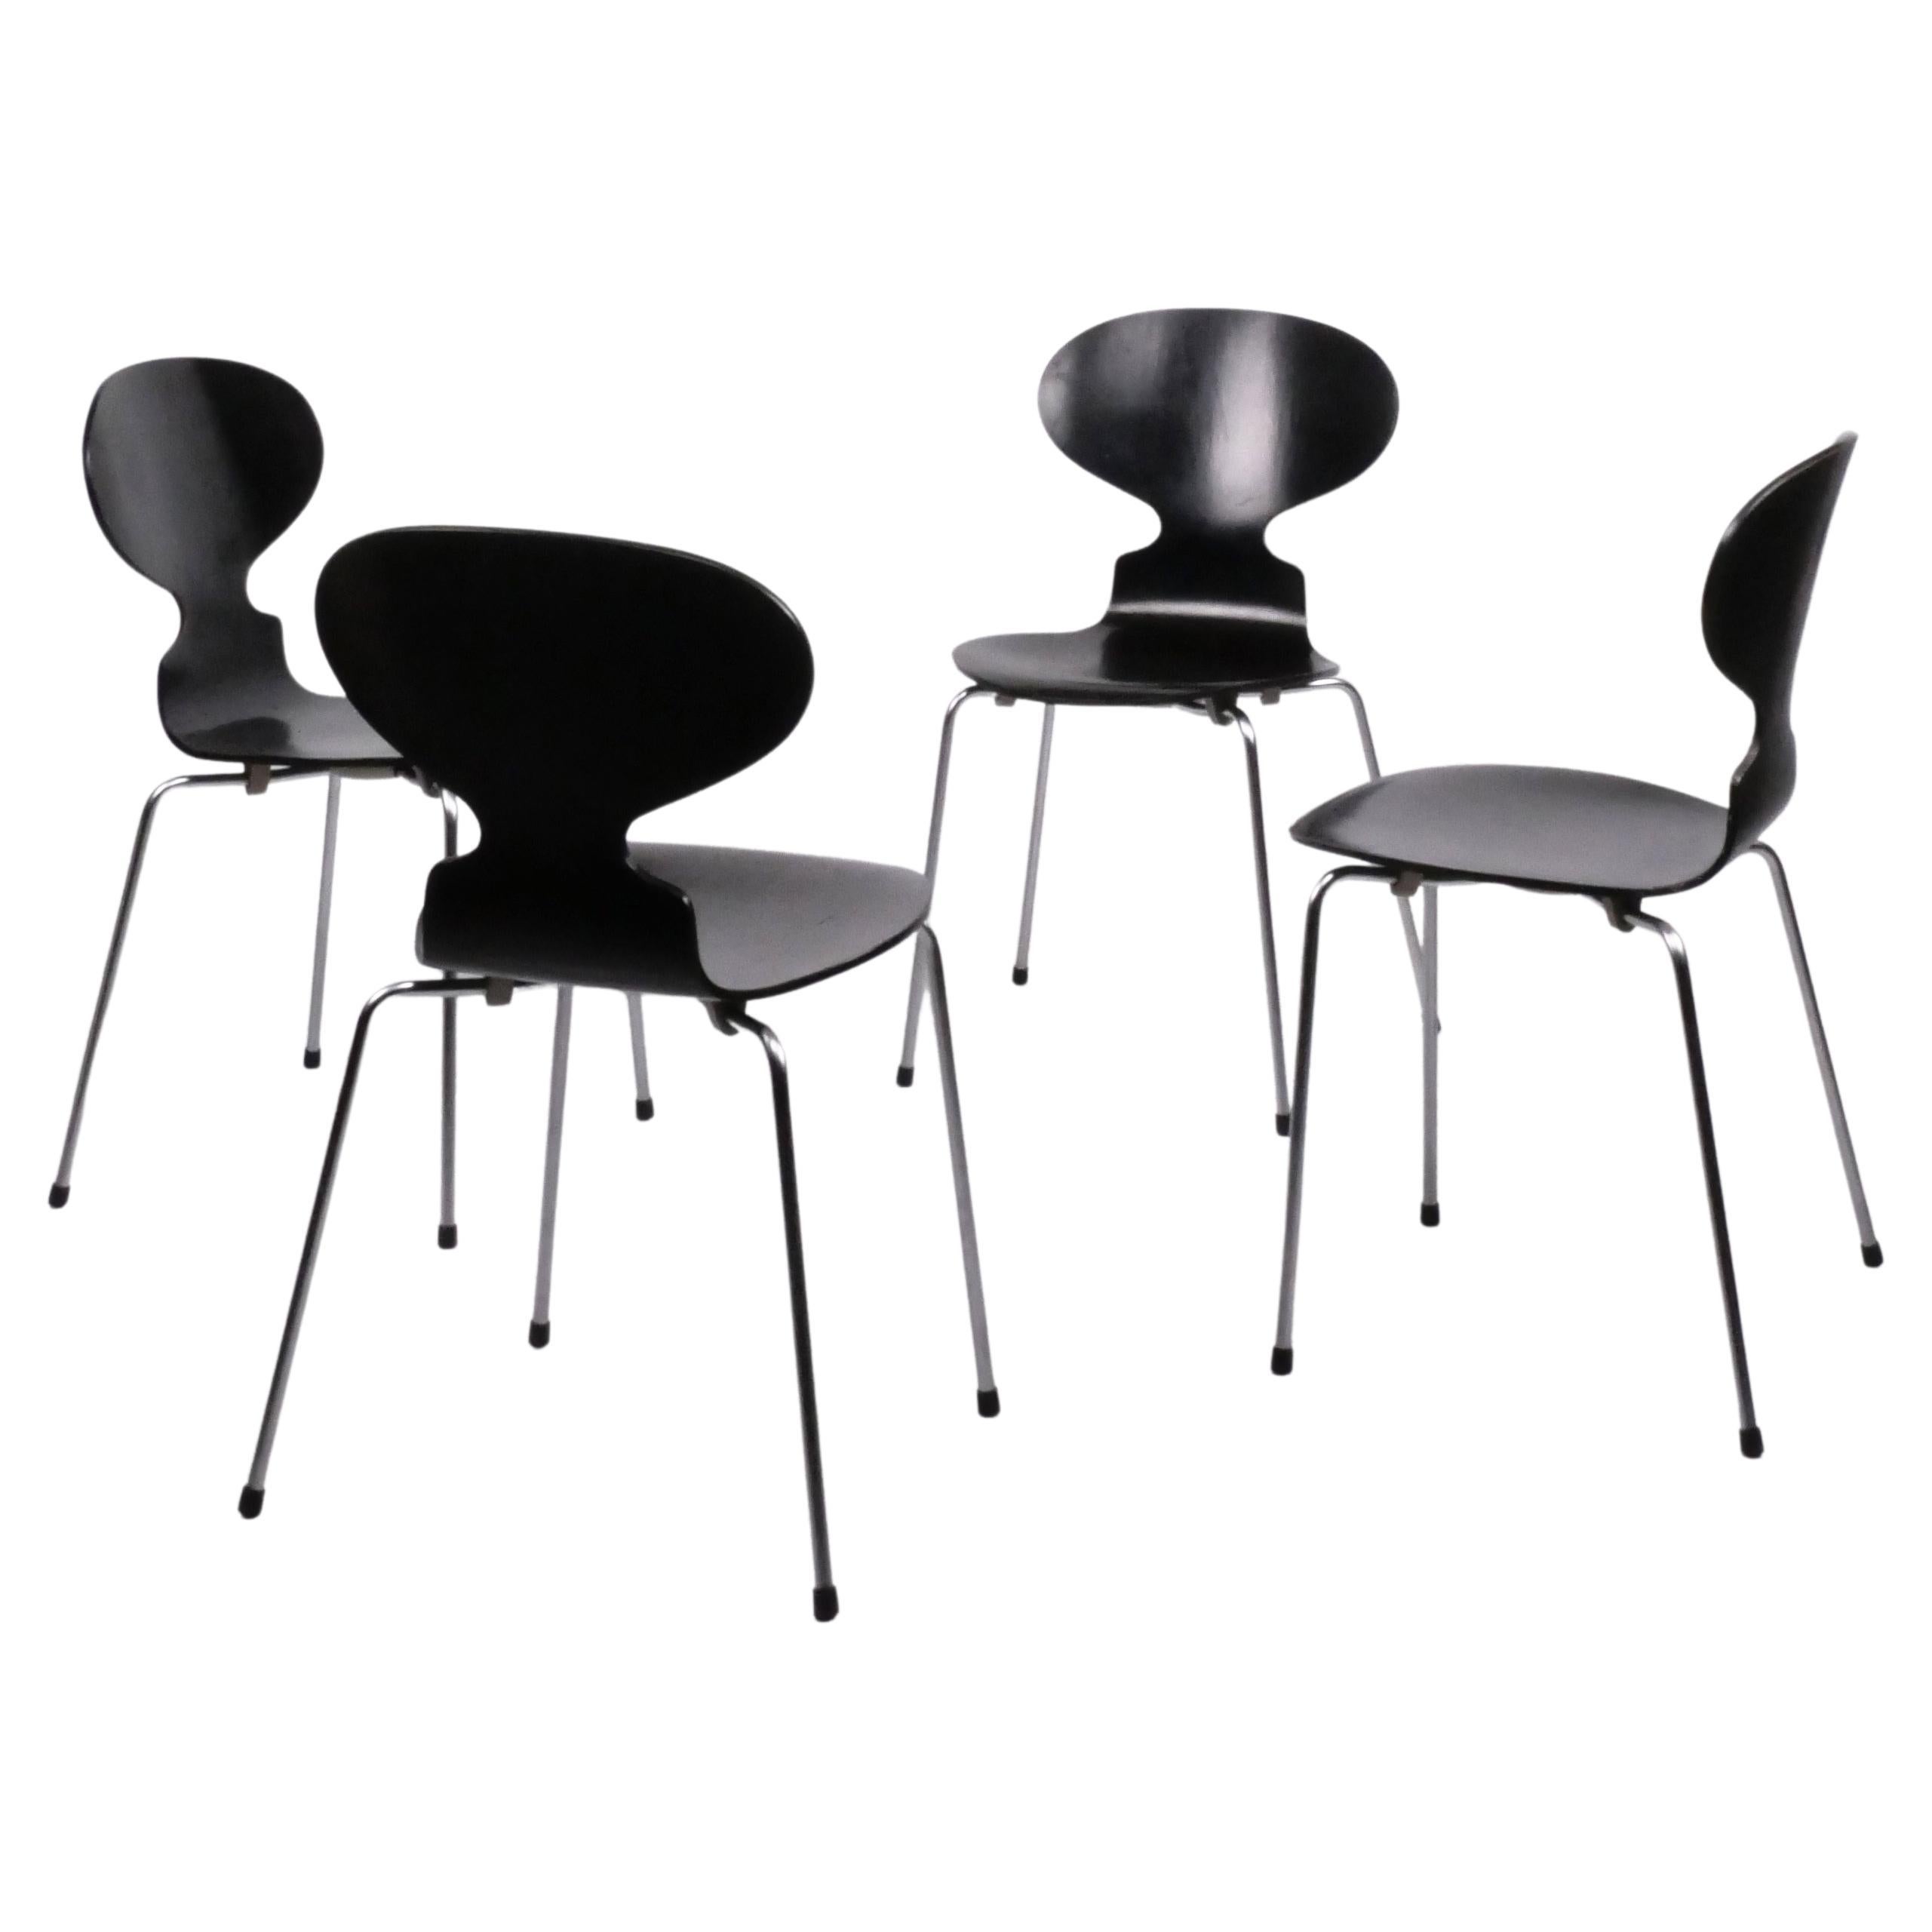 Set of 4 ‘Ant’ Chairs by Arne Jacobsen for Fritz Hansen, 2 early sets available